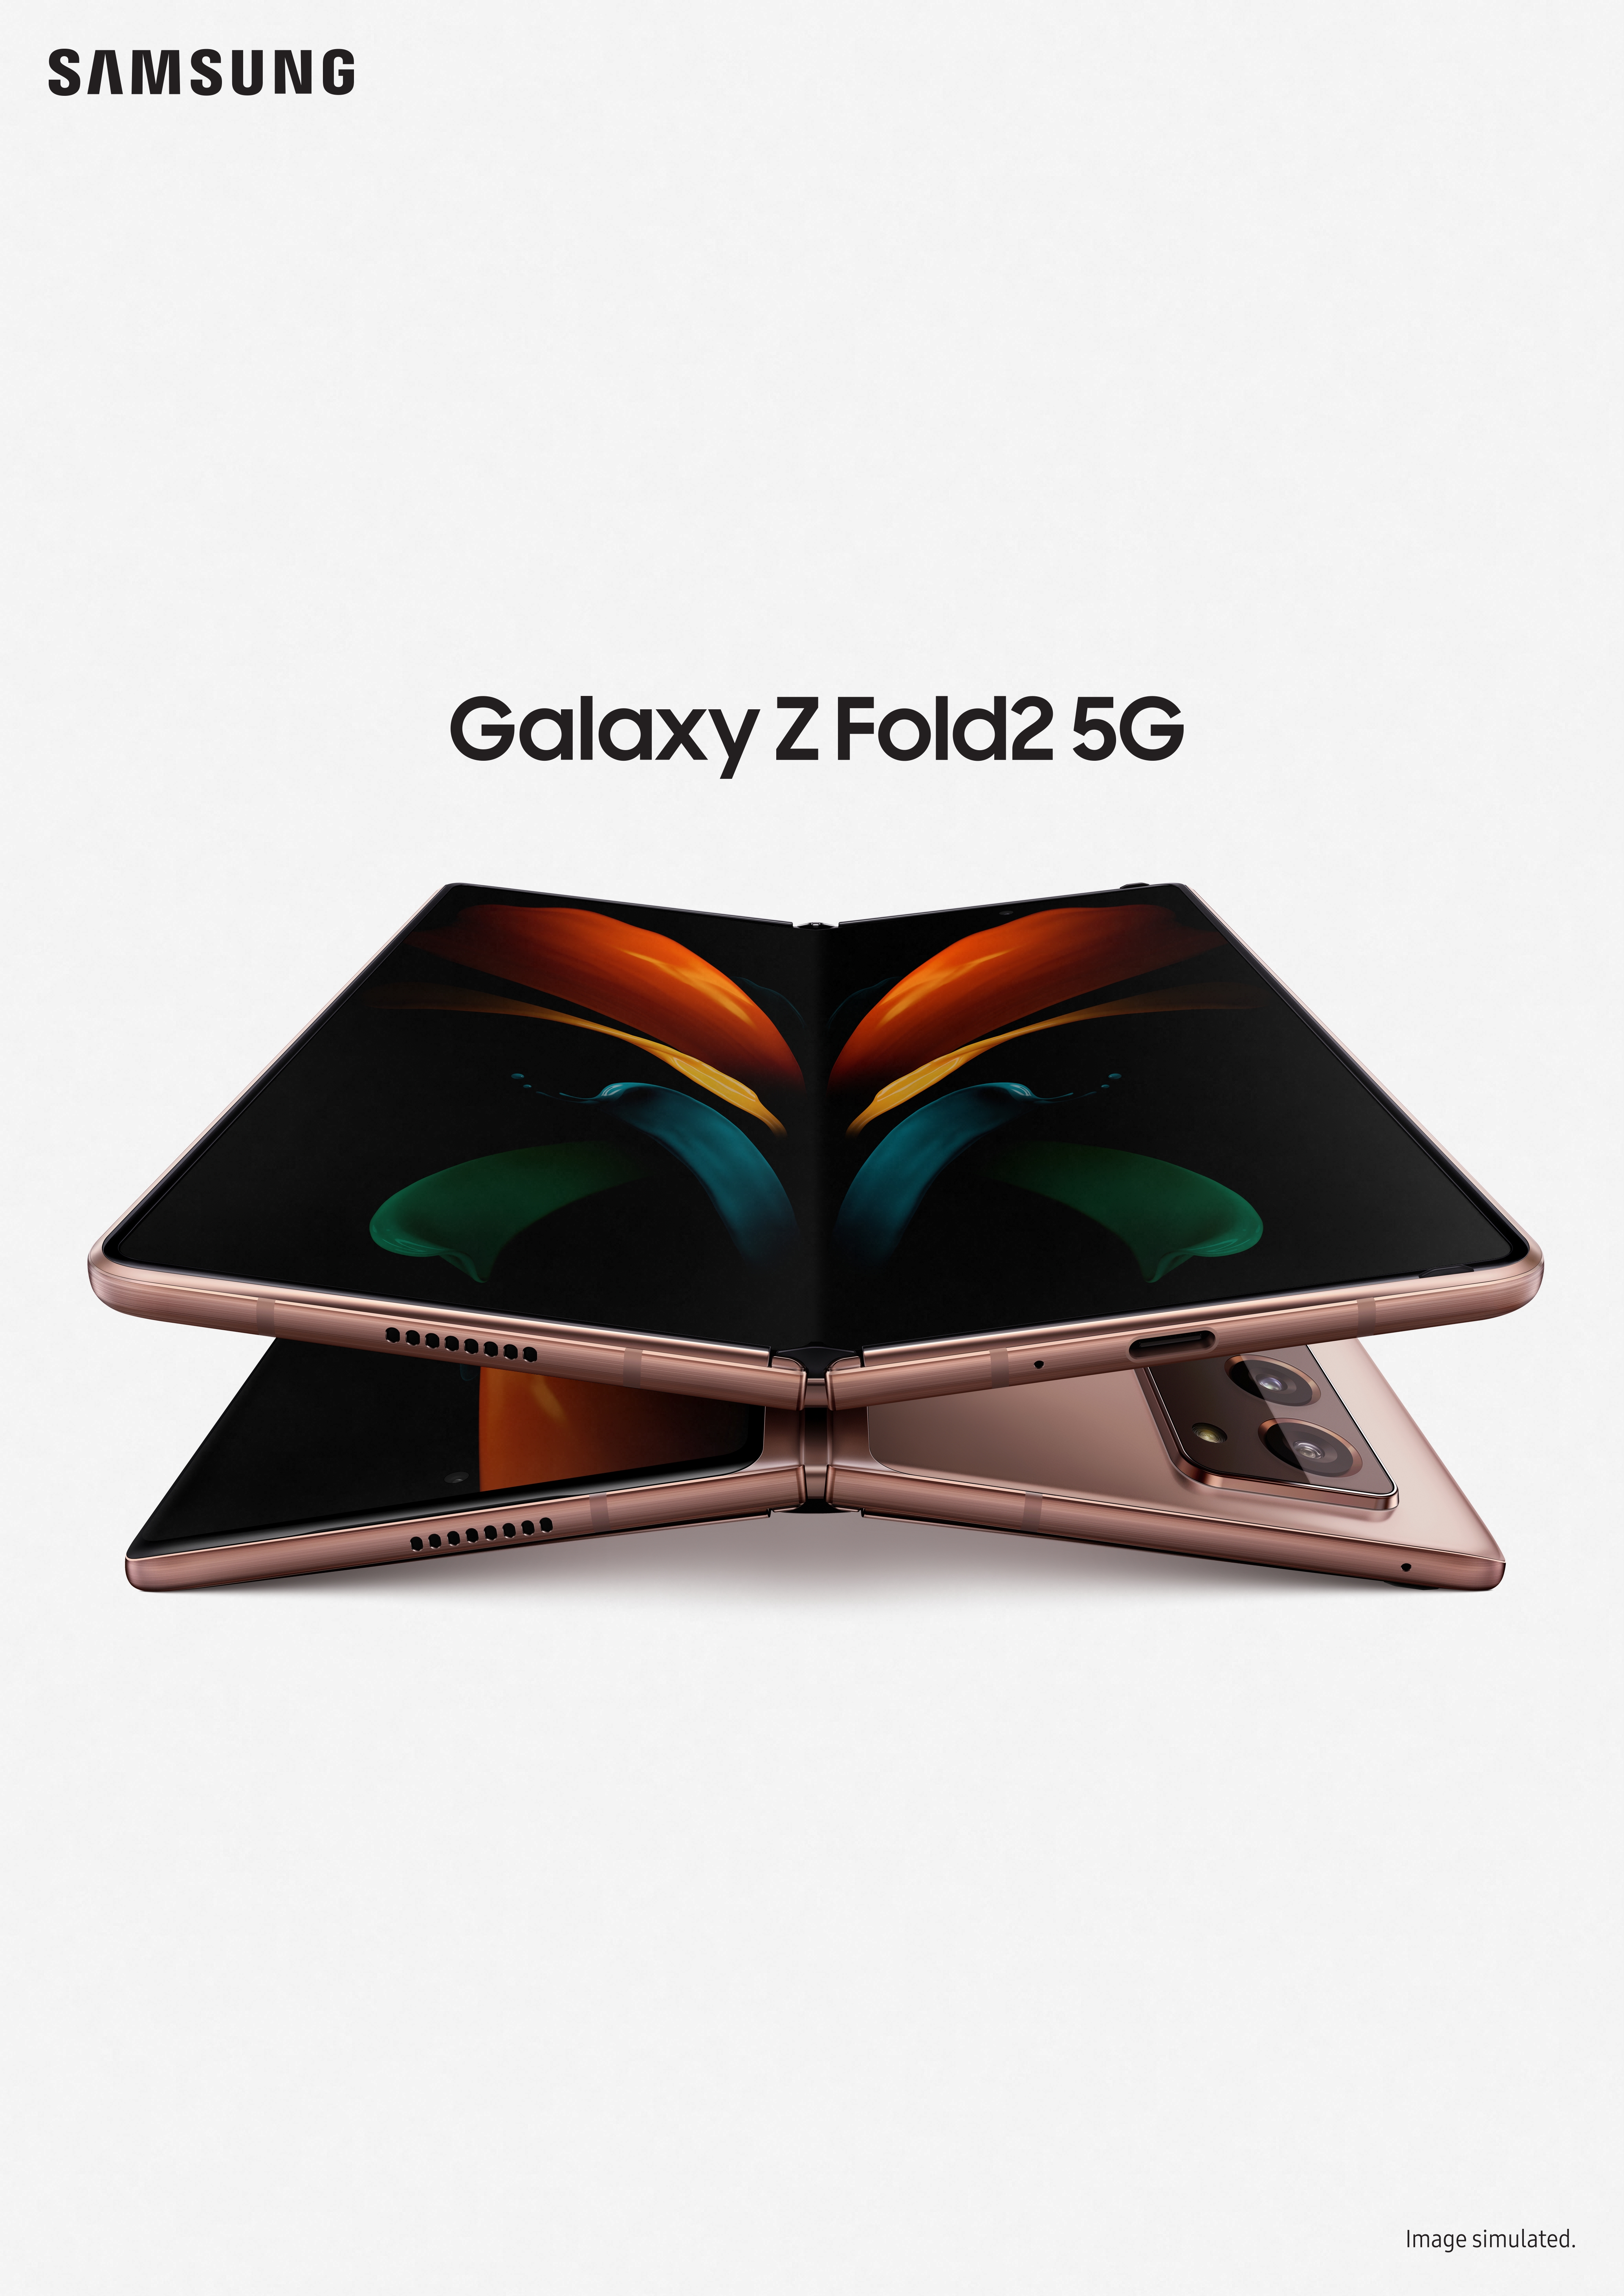 Samsung Galaxy Z Fold2 5G will be available for pre-order at $2,888 from 9 September - 1